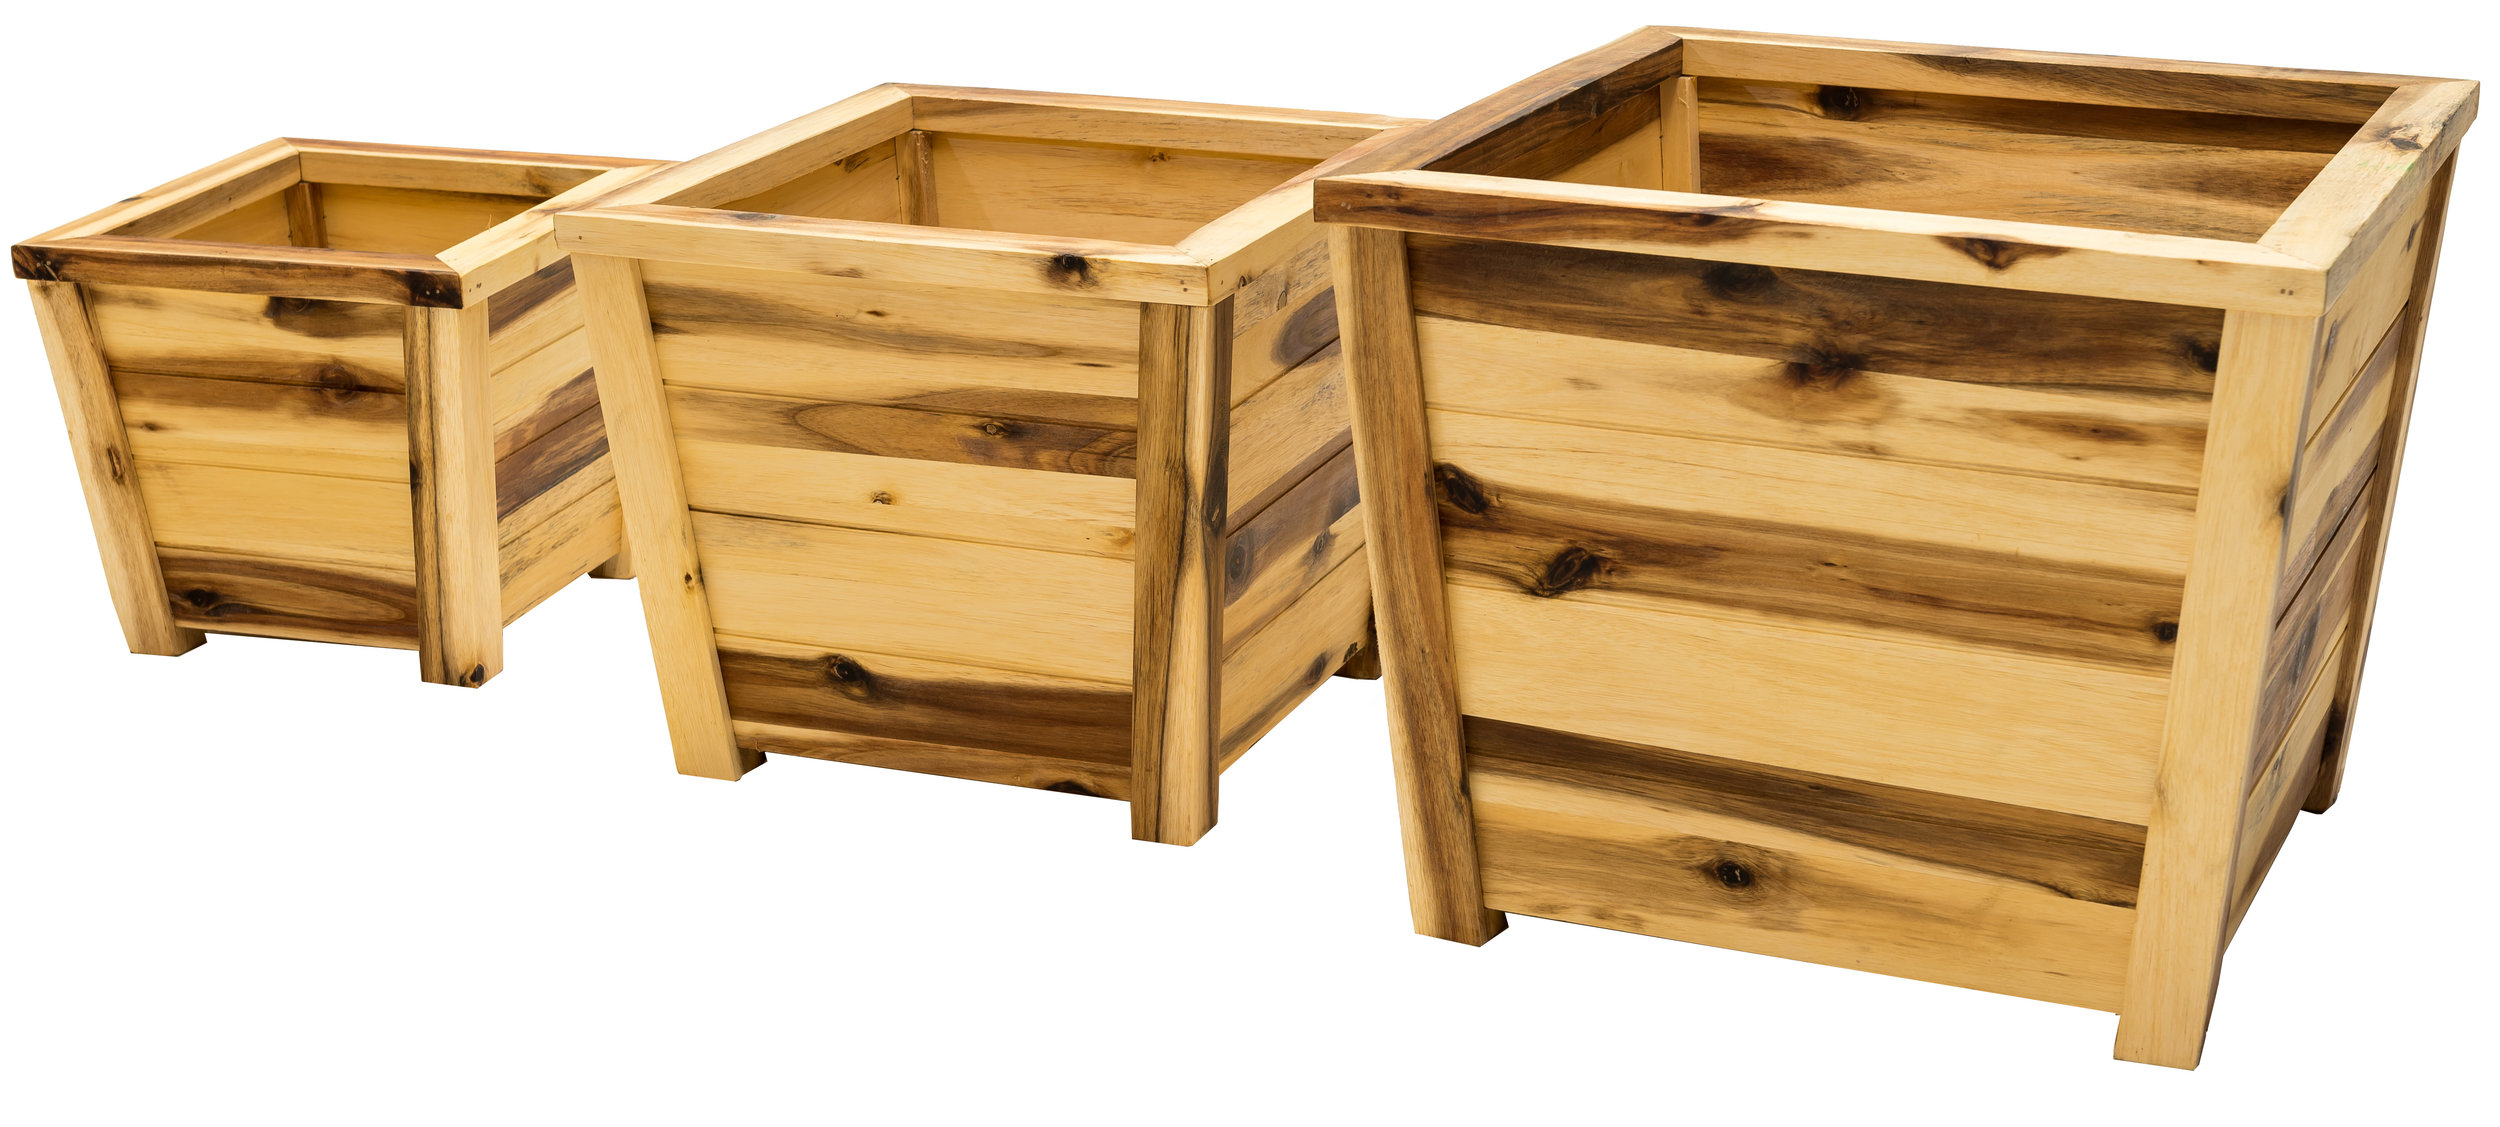  nested acacia planters dimensions: 17”x14.5” 